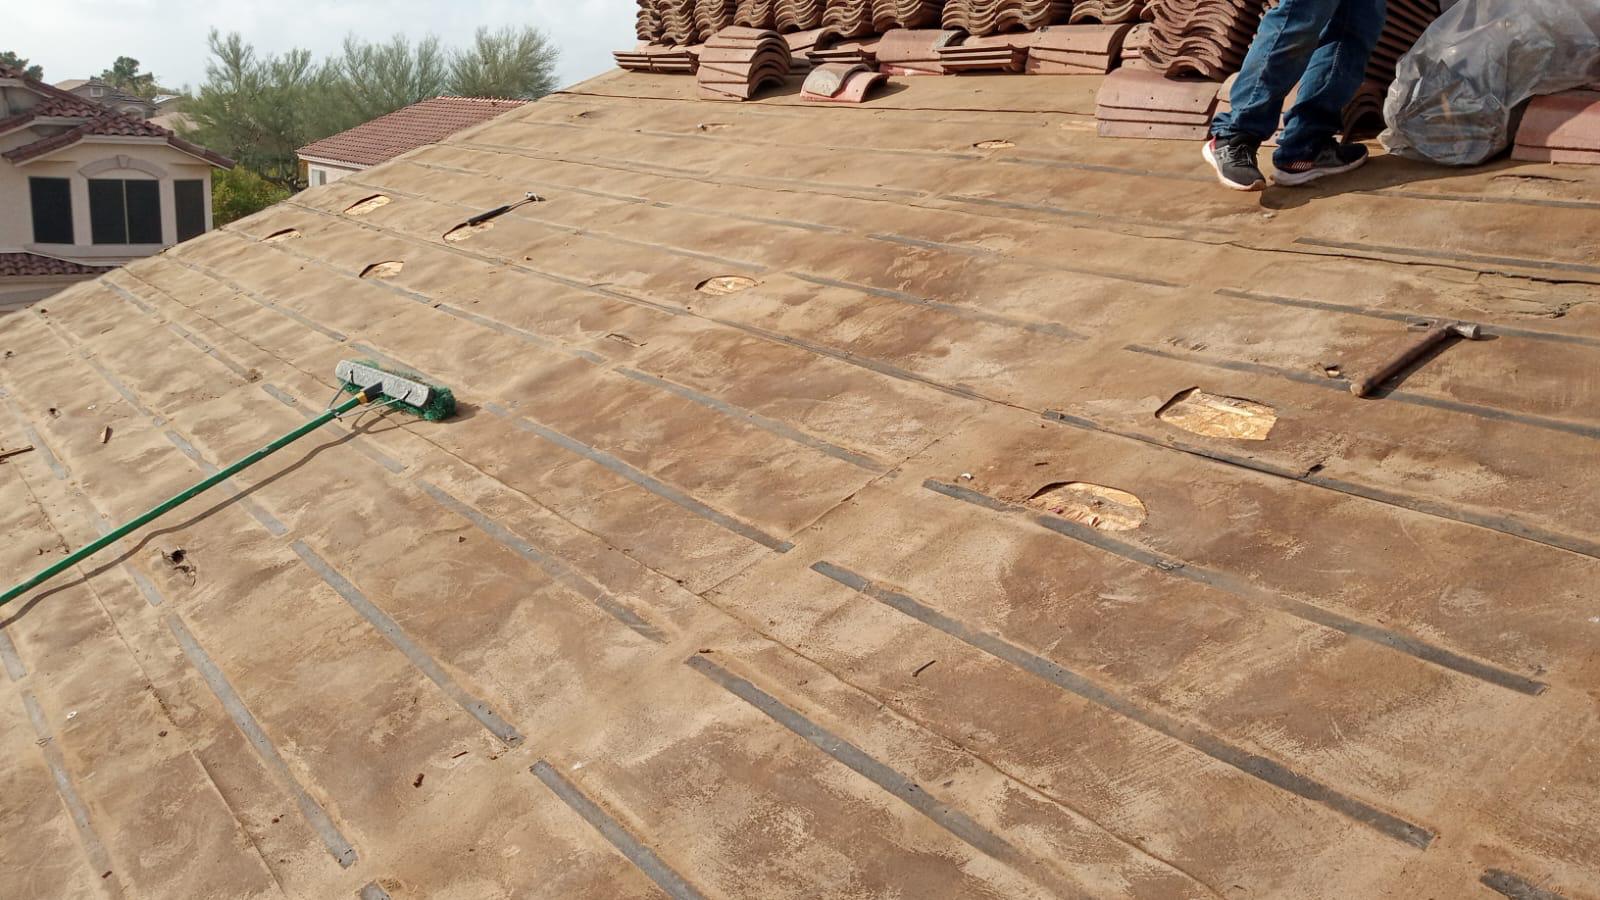 A man is re-roofing a house with tiles in Mesa.